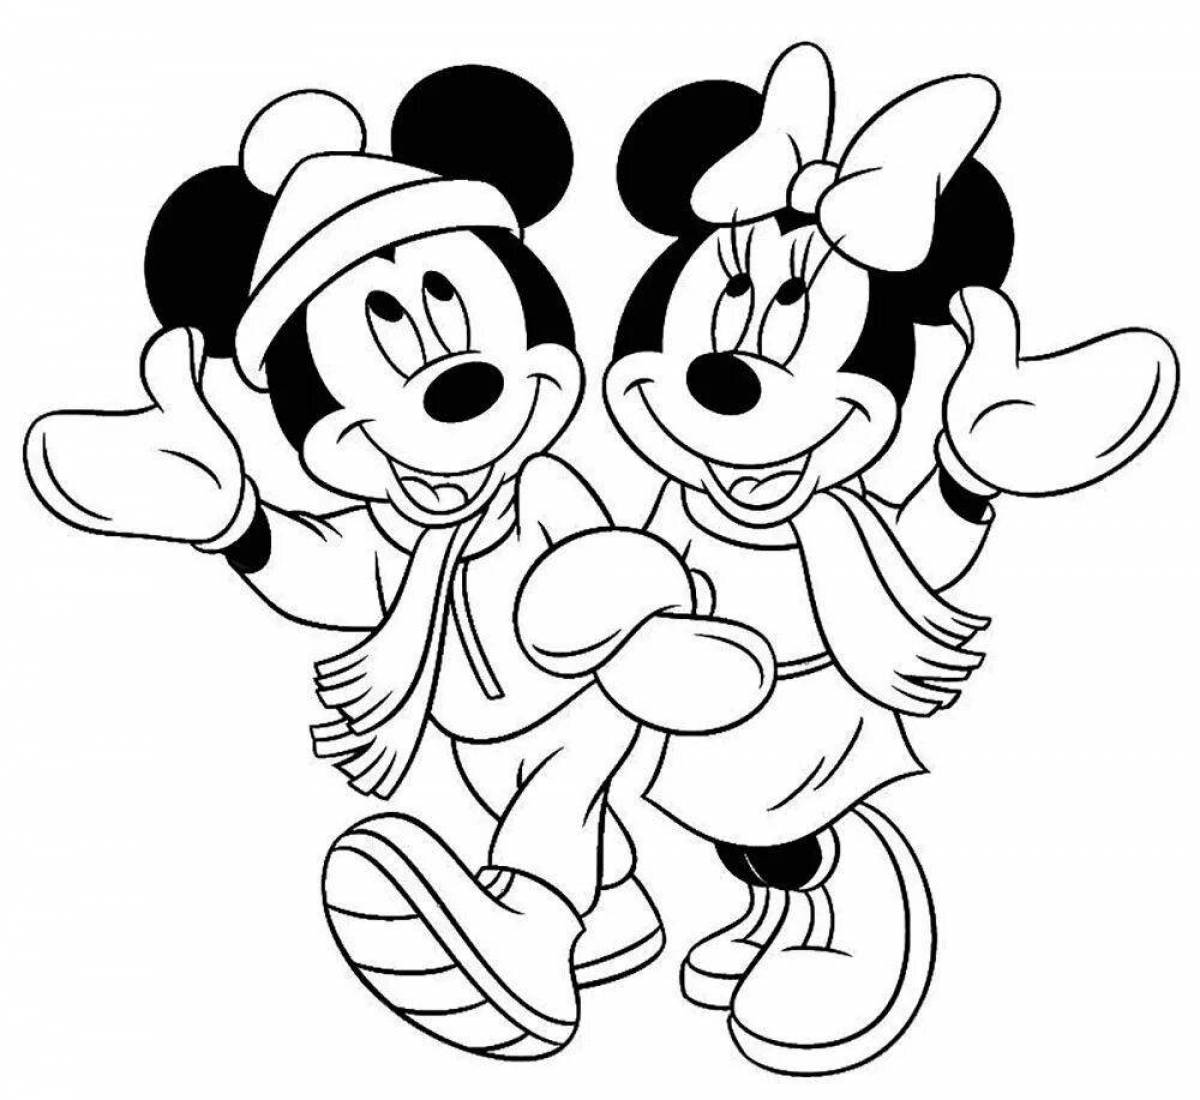 Mickey mouse glitter coloring book